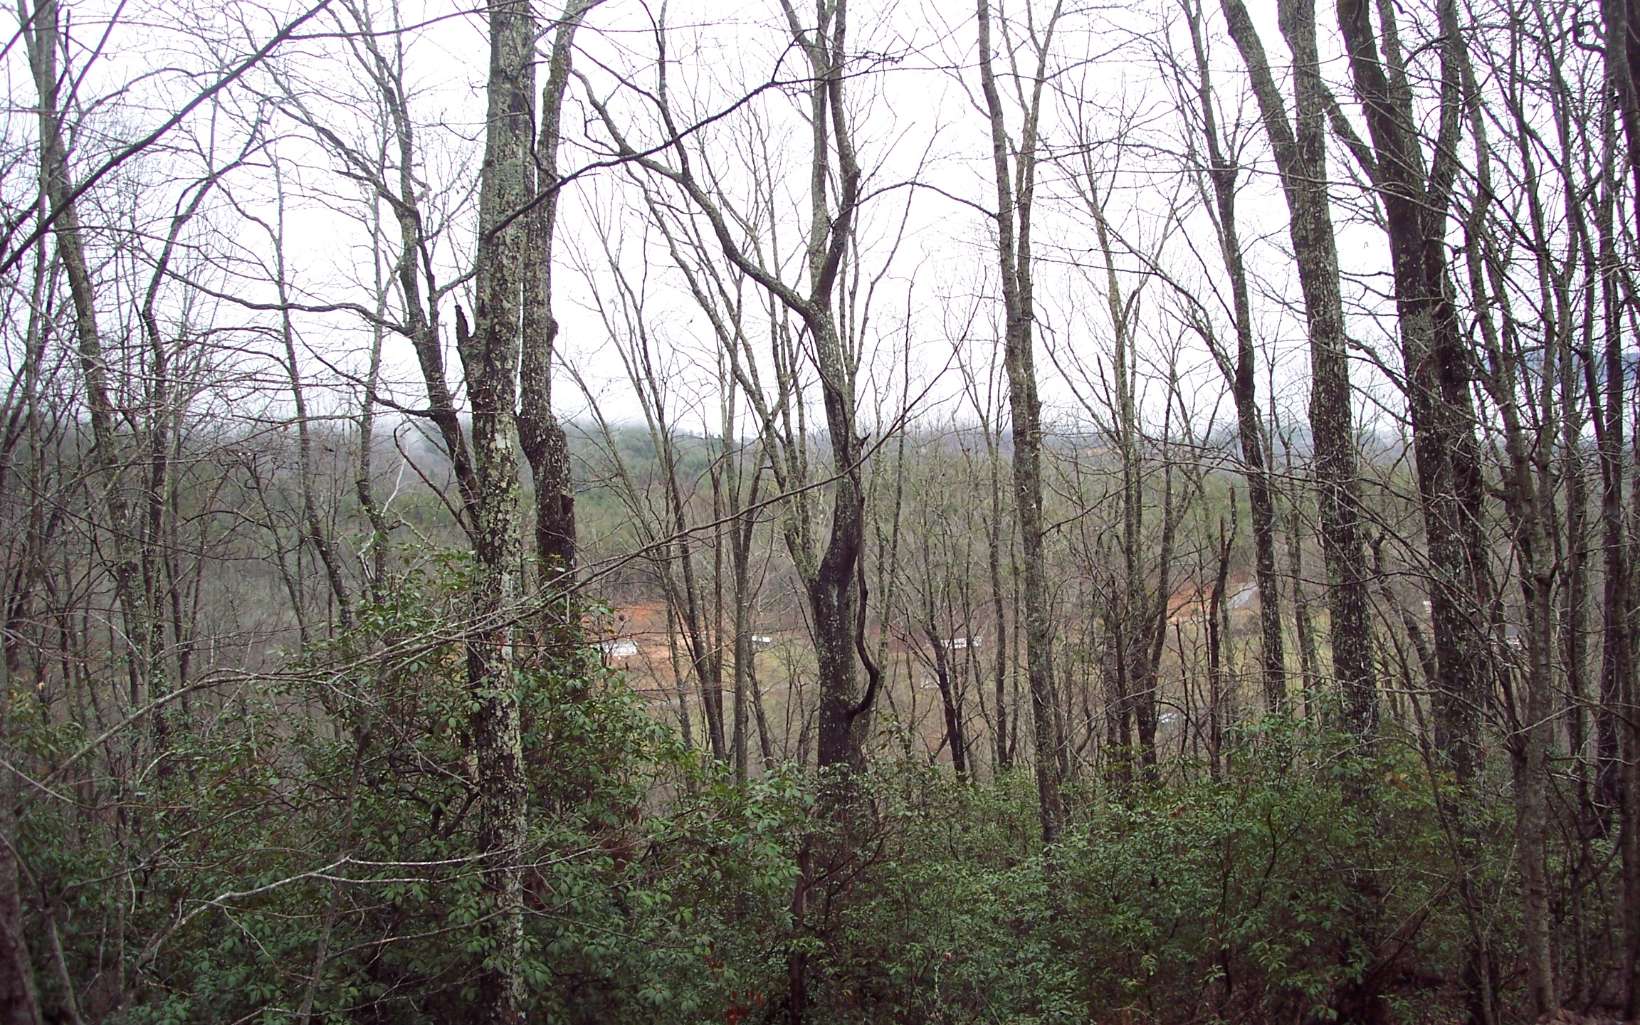 Wonderful deep wooded views from beautiful Lot 11A in Autumn Ridge Subdivision. This is a relatively small Subdivision with minimal covenants & restrictions designed to protect your investment, and not be a hassle for the owner. Nicely laying land with great building sites. All paved roads for easy access. Privacy and quiet, yet within 5 miles to either Hayesville, North Carolina or Hiawassee, Georgia. Additional contiguous acreage with great mountain & Lake Chatuge views is available to provide an even greater private retreat for your mountain cabin/home. See Lots #13A and #17 contiguous properties each at $19,000 MLS 315922 and 315923.